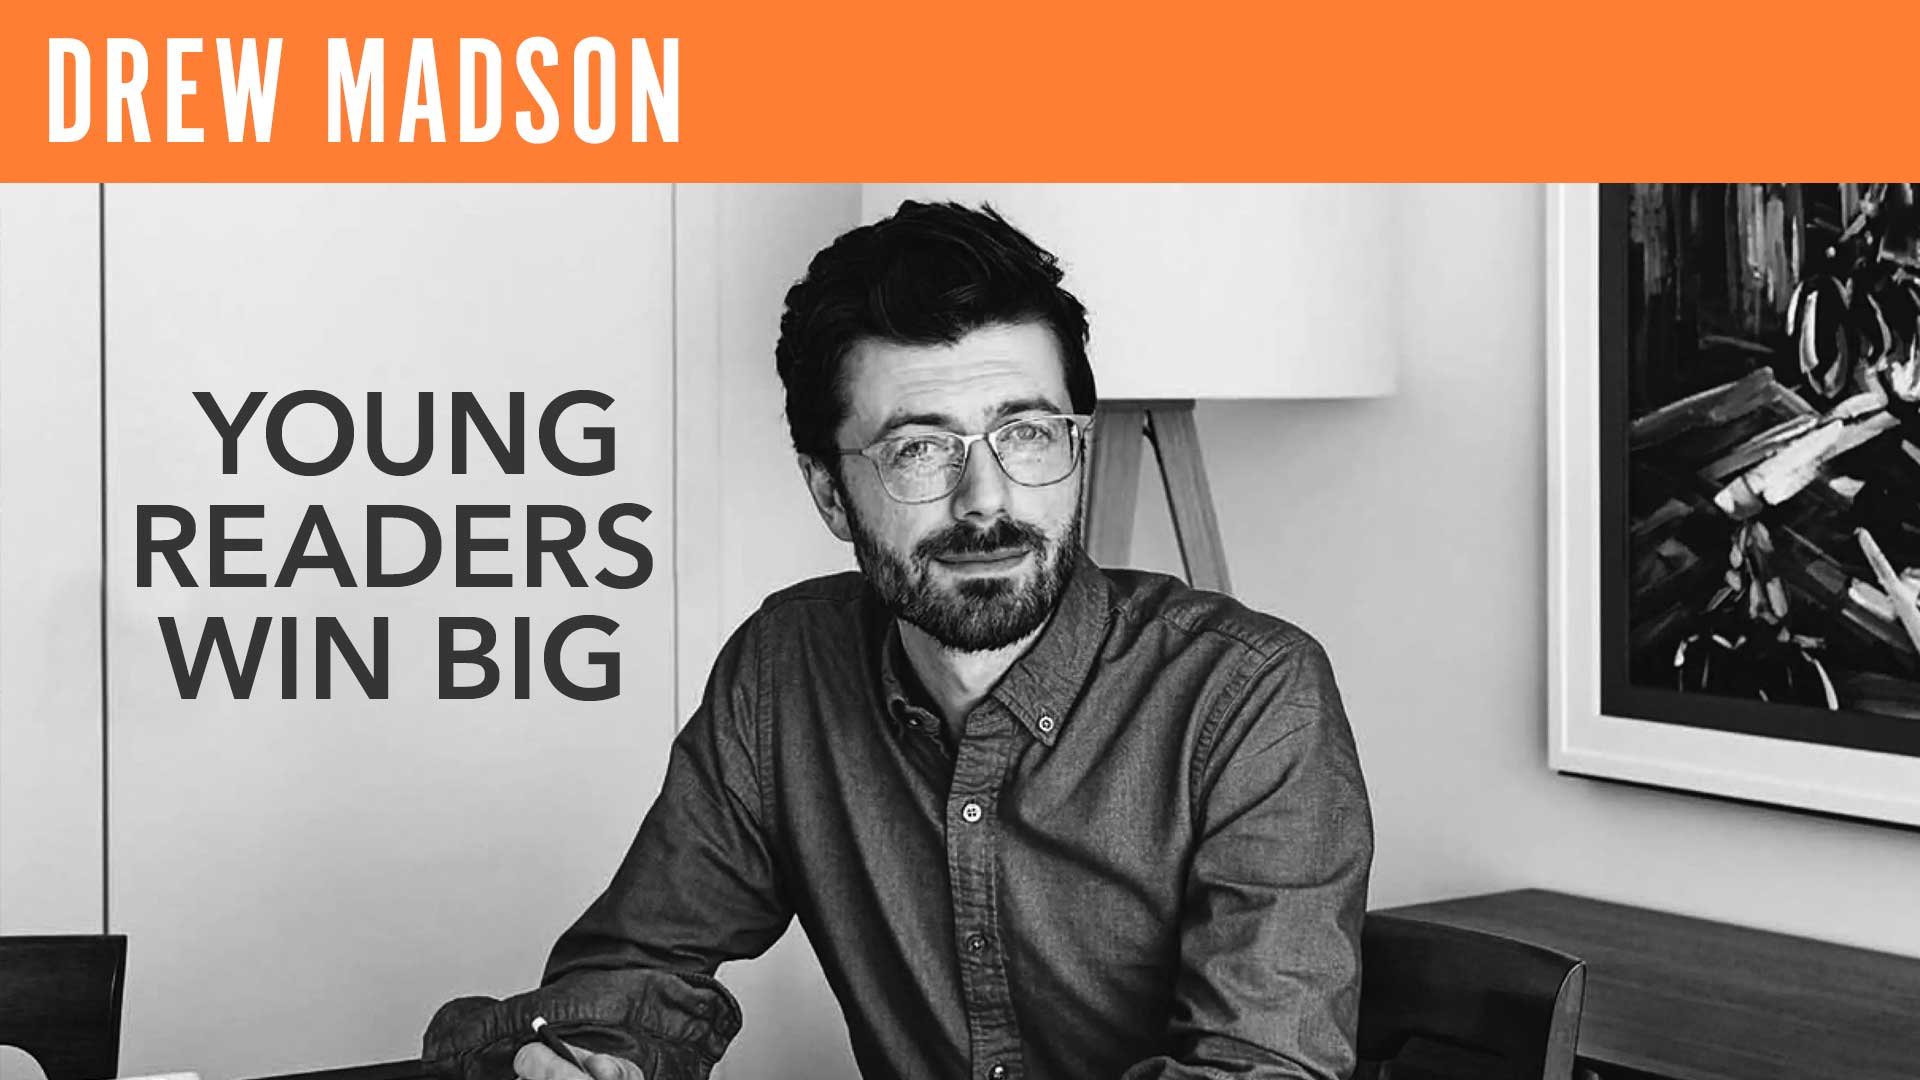 Drew Madson "Young Readers Win Big"